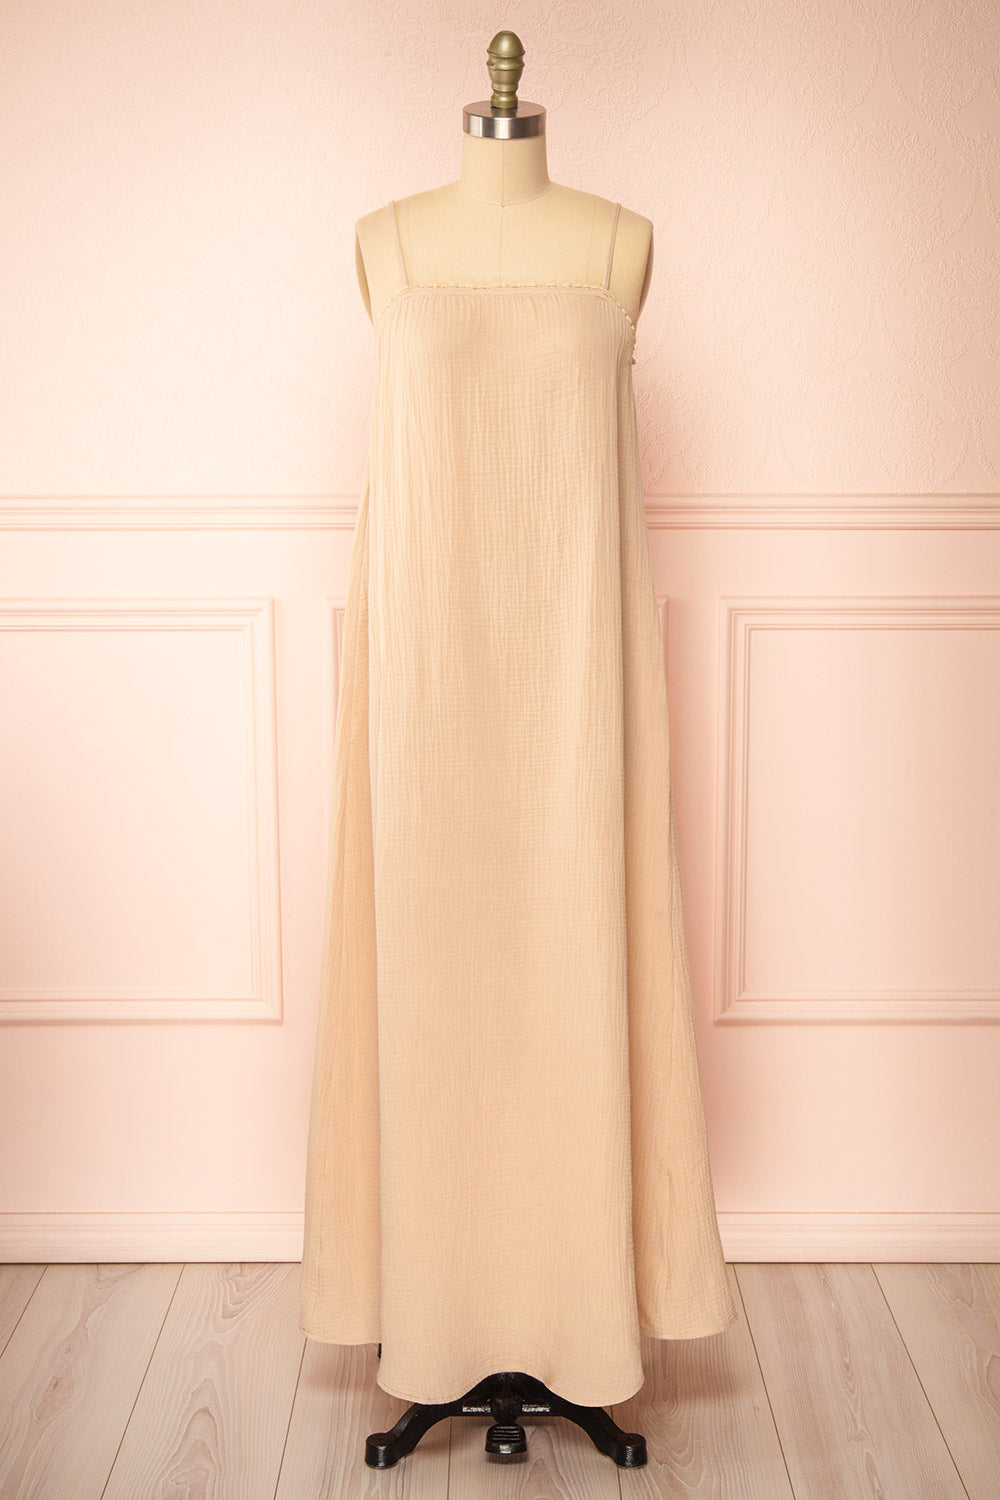 Marinet Beige Long Loose-Fitted Dress | Boutique 1861 front view